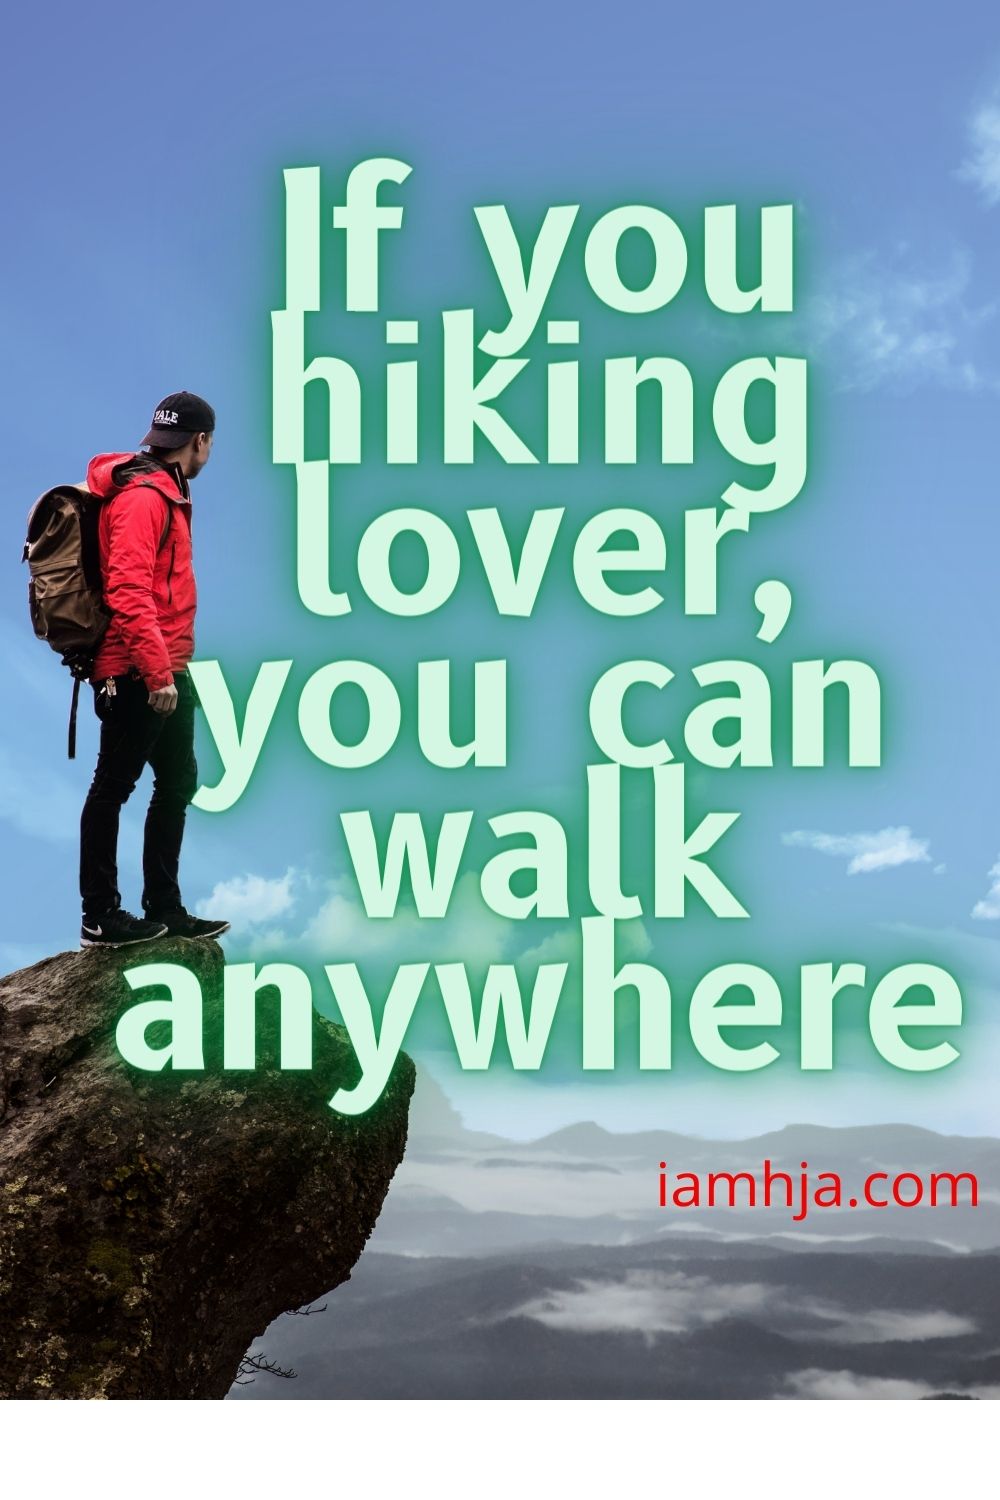 If you hiking lover, you can walk anywhere.